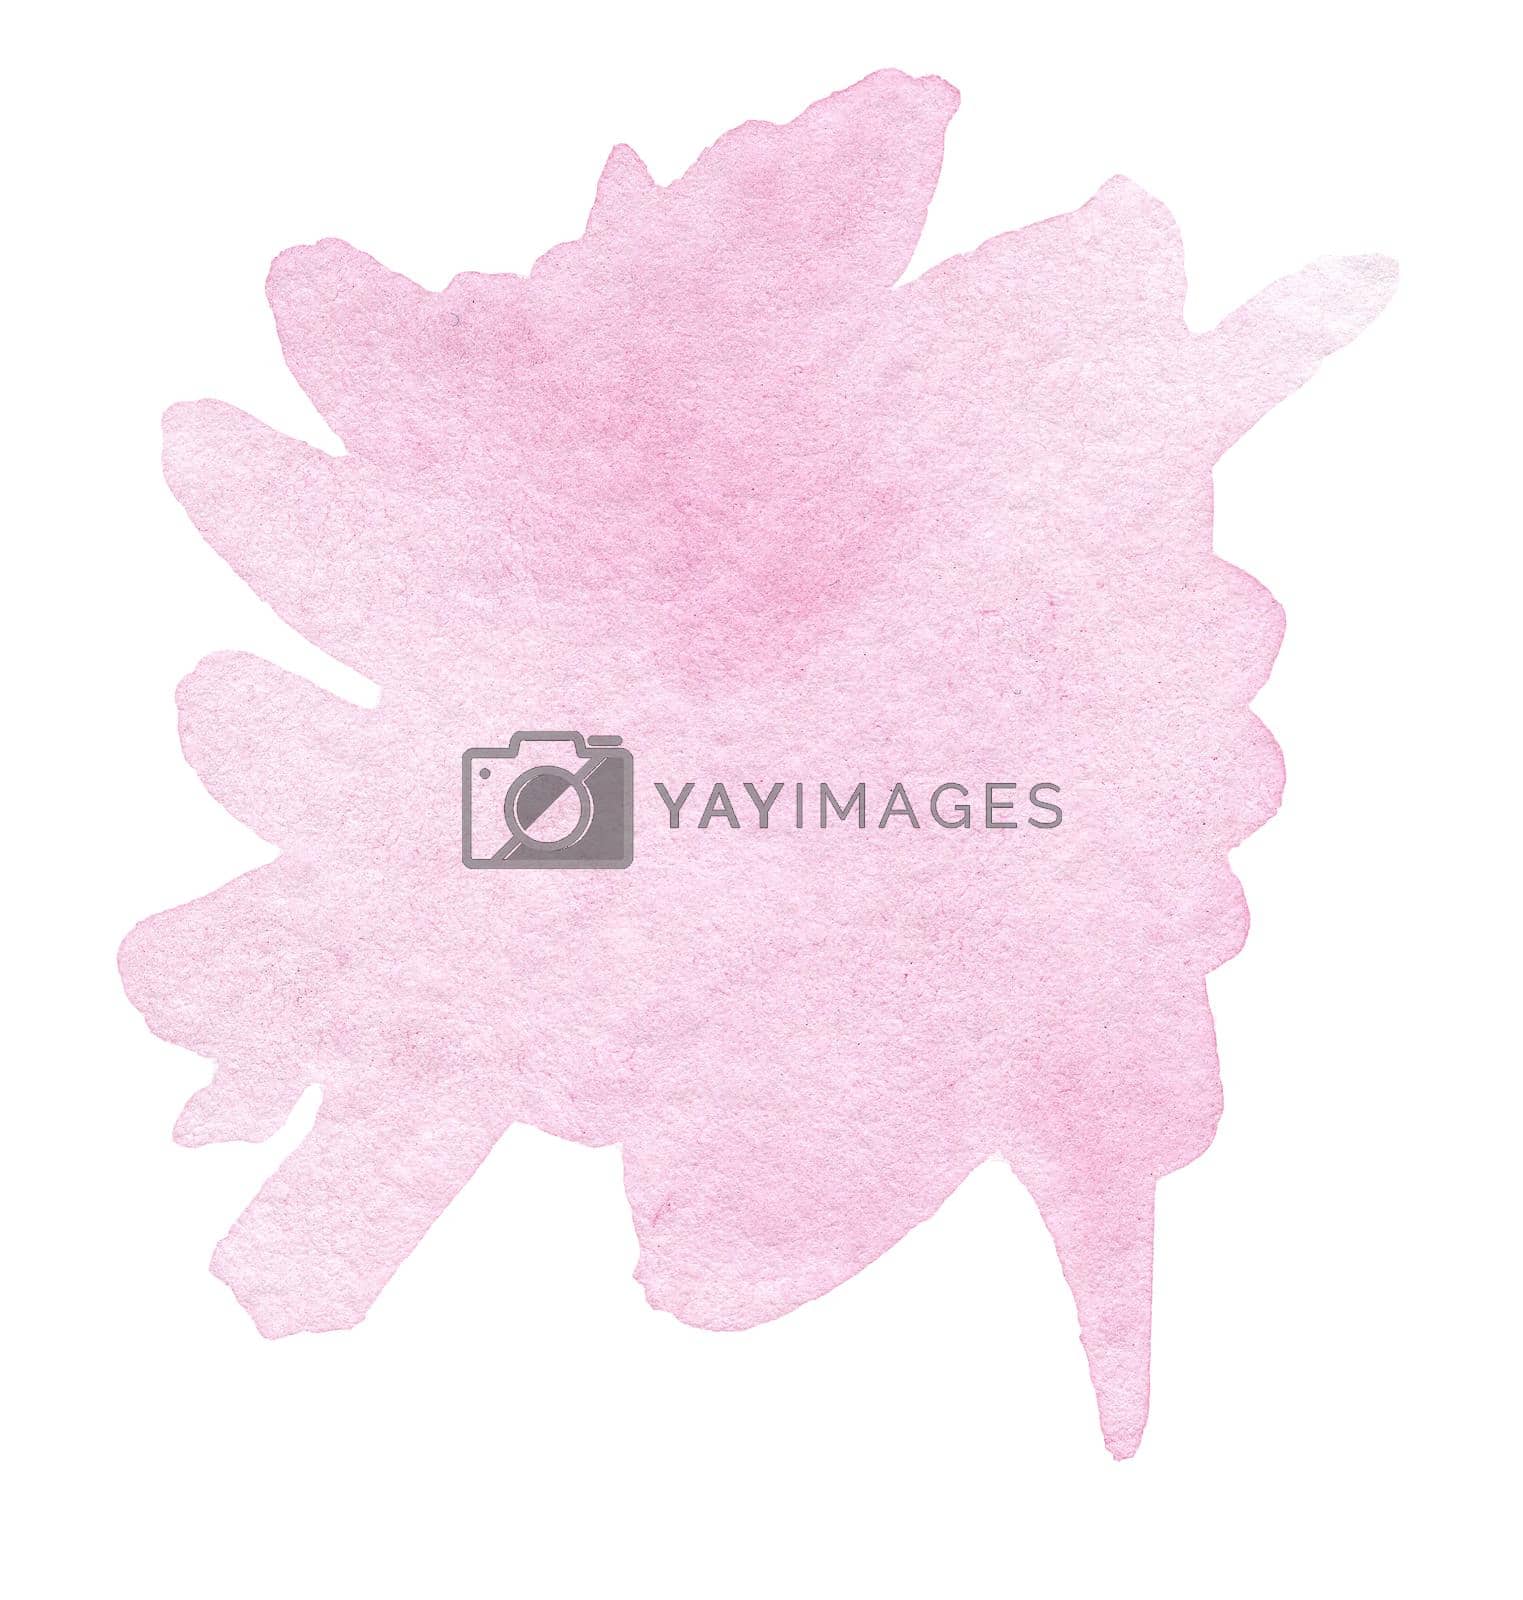 Royalty free image of watercolor pink splash isolated on white background by dreamloud